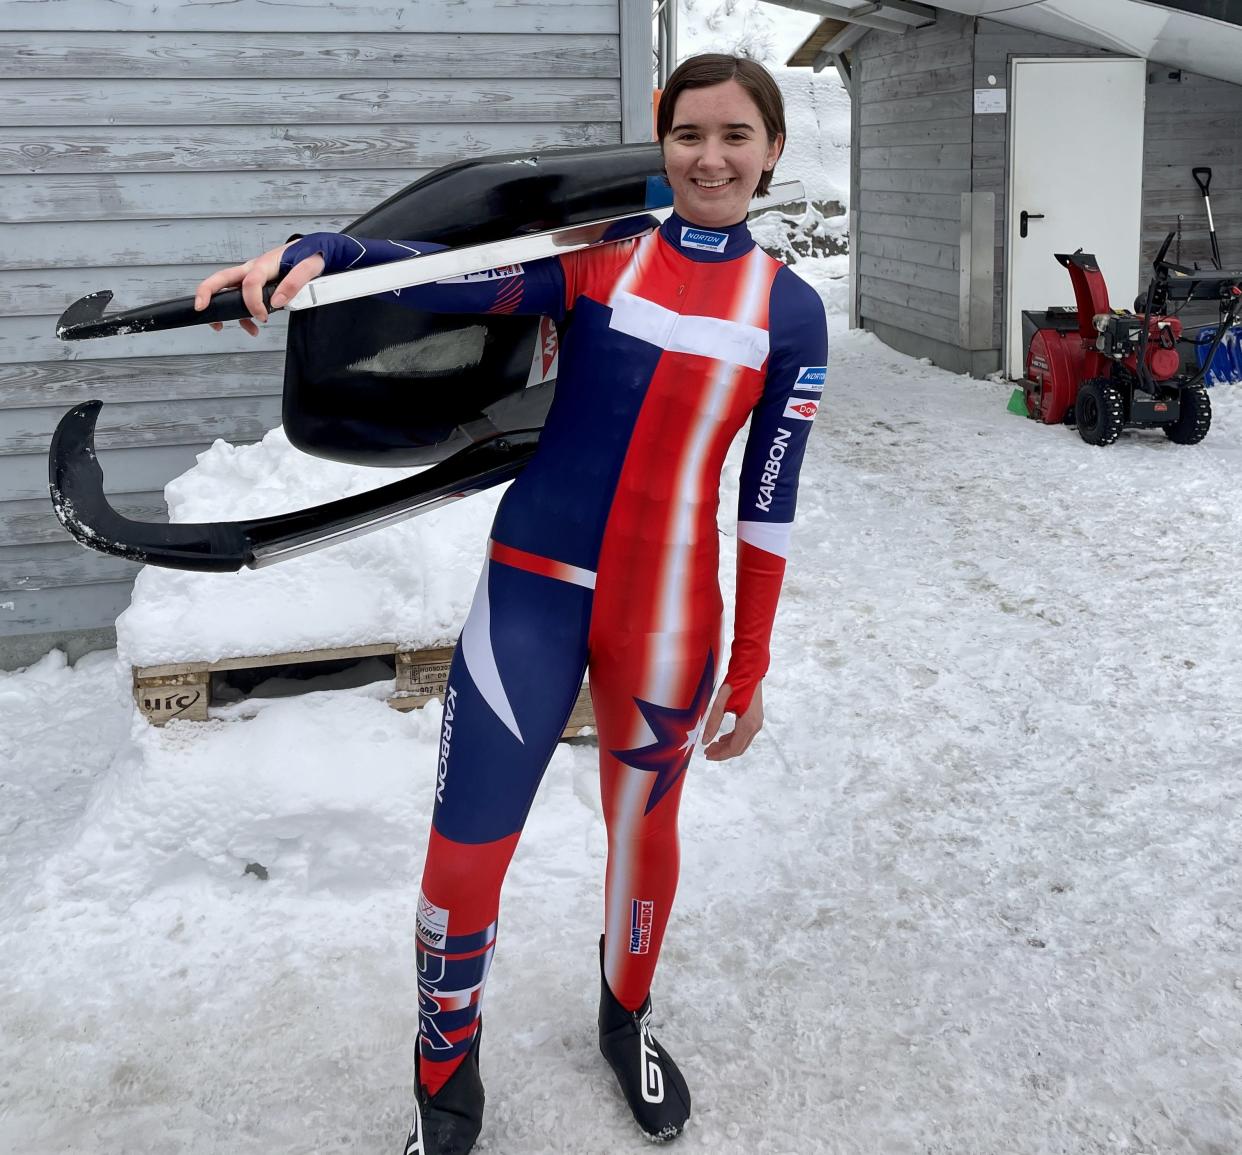 15. Thomas Worthington junior Adeline Albert has recovered from a traumatic brain injury and returned to racing in luge.